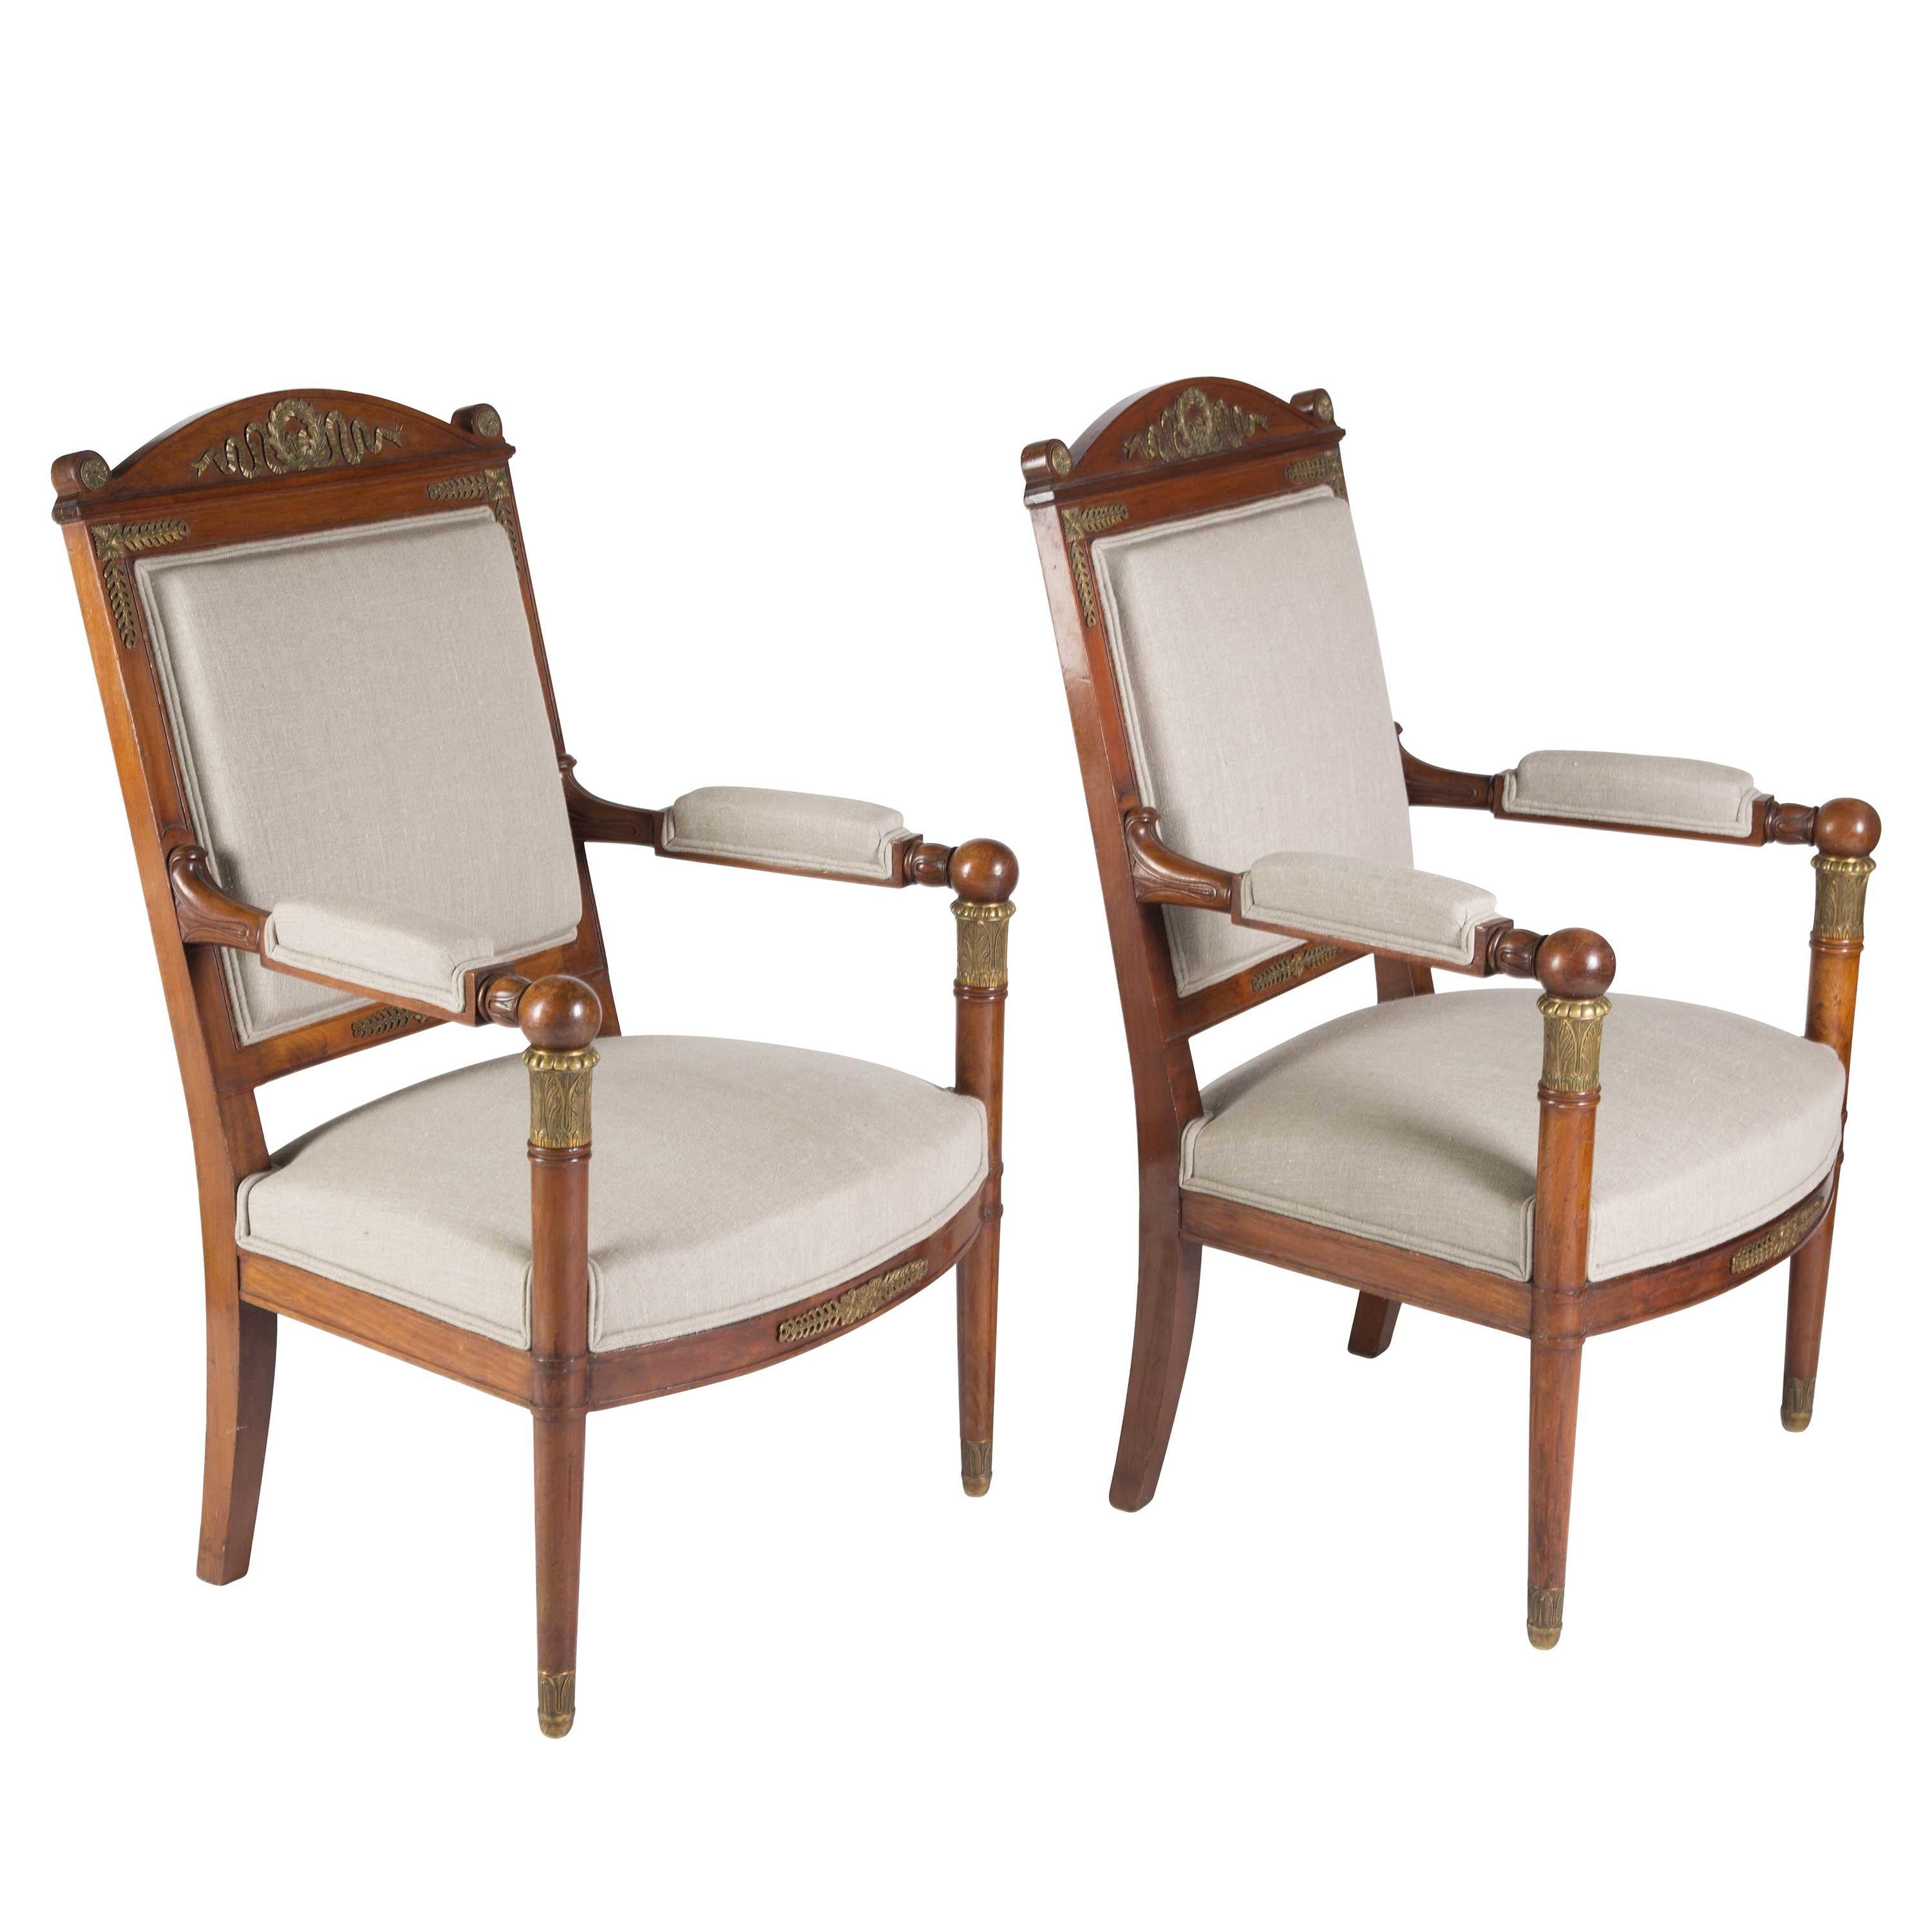 A pair of Empire Revival mahogany fauteuils with bronze mounts, fully reupholstered, French, circa 1875. Measures: Seat height 43 cm, seat depth 46 cm.